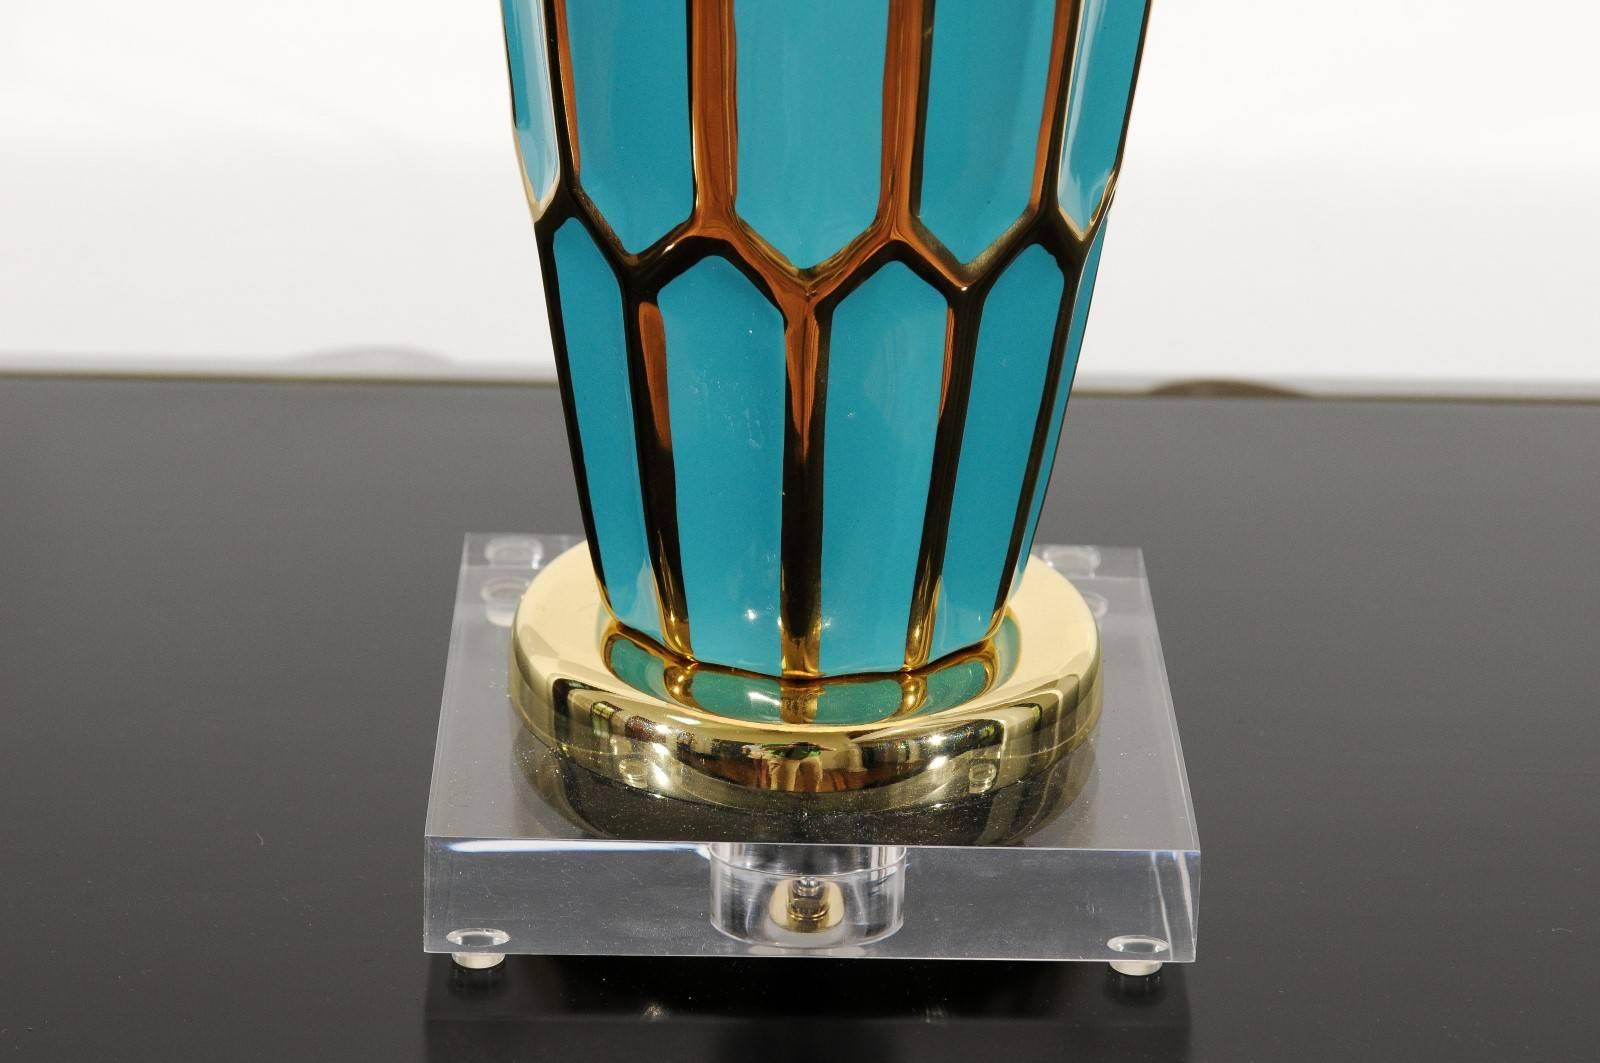 Striking Pair of Custom Ceramic Lamps in Turquoise and Gold In Excellent Condition For Sale In Atlanta, GA